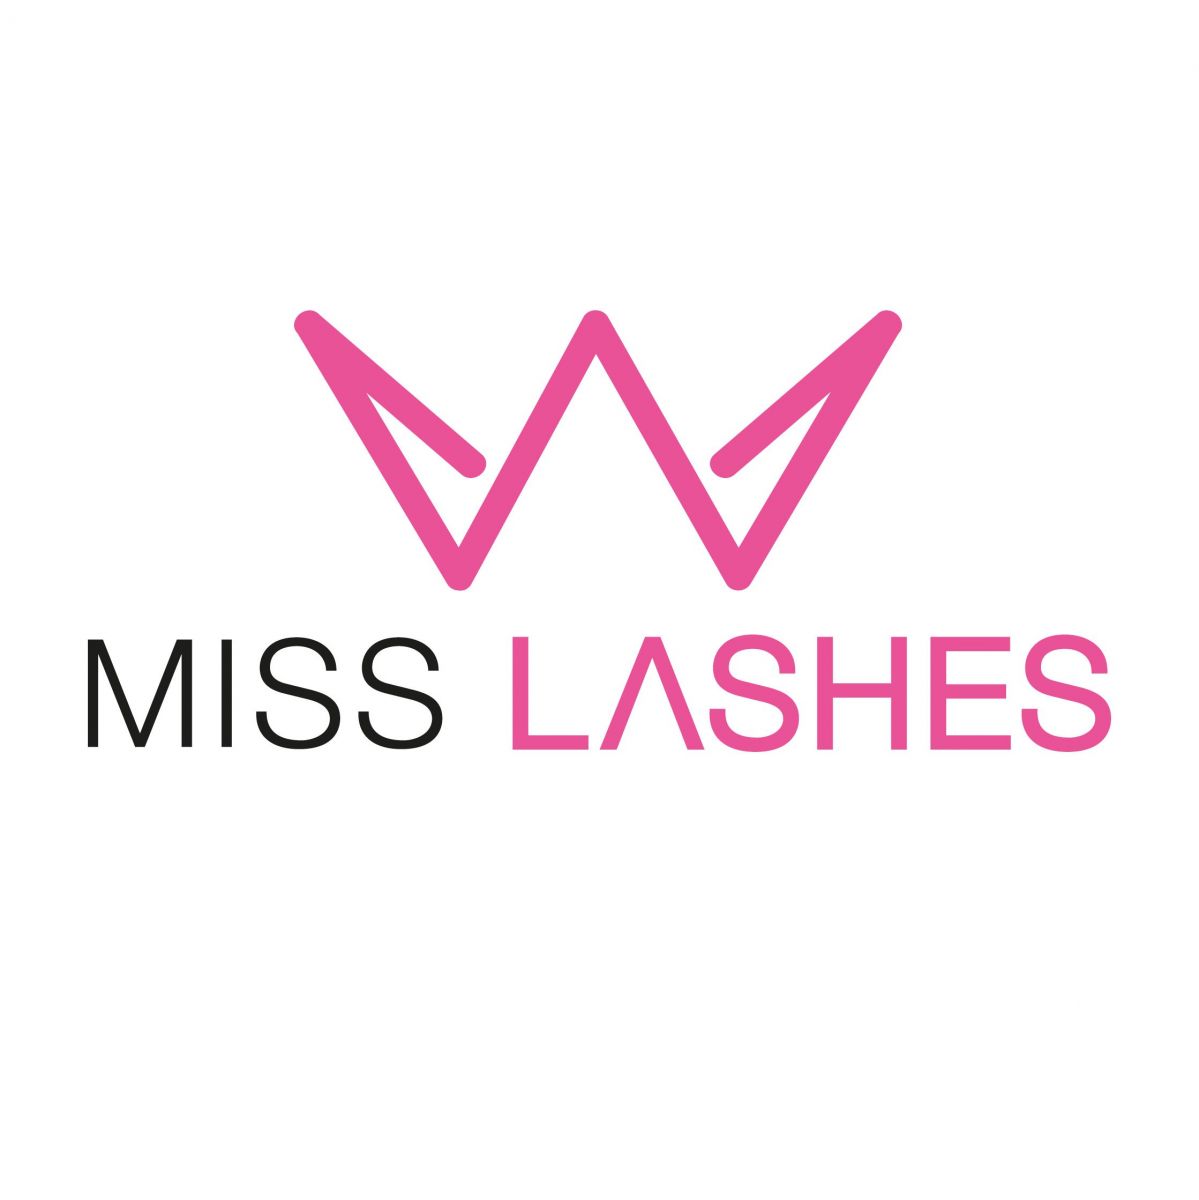 Miss lashes